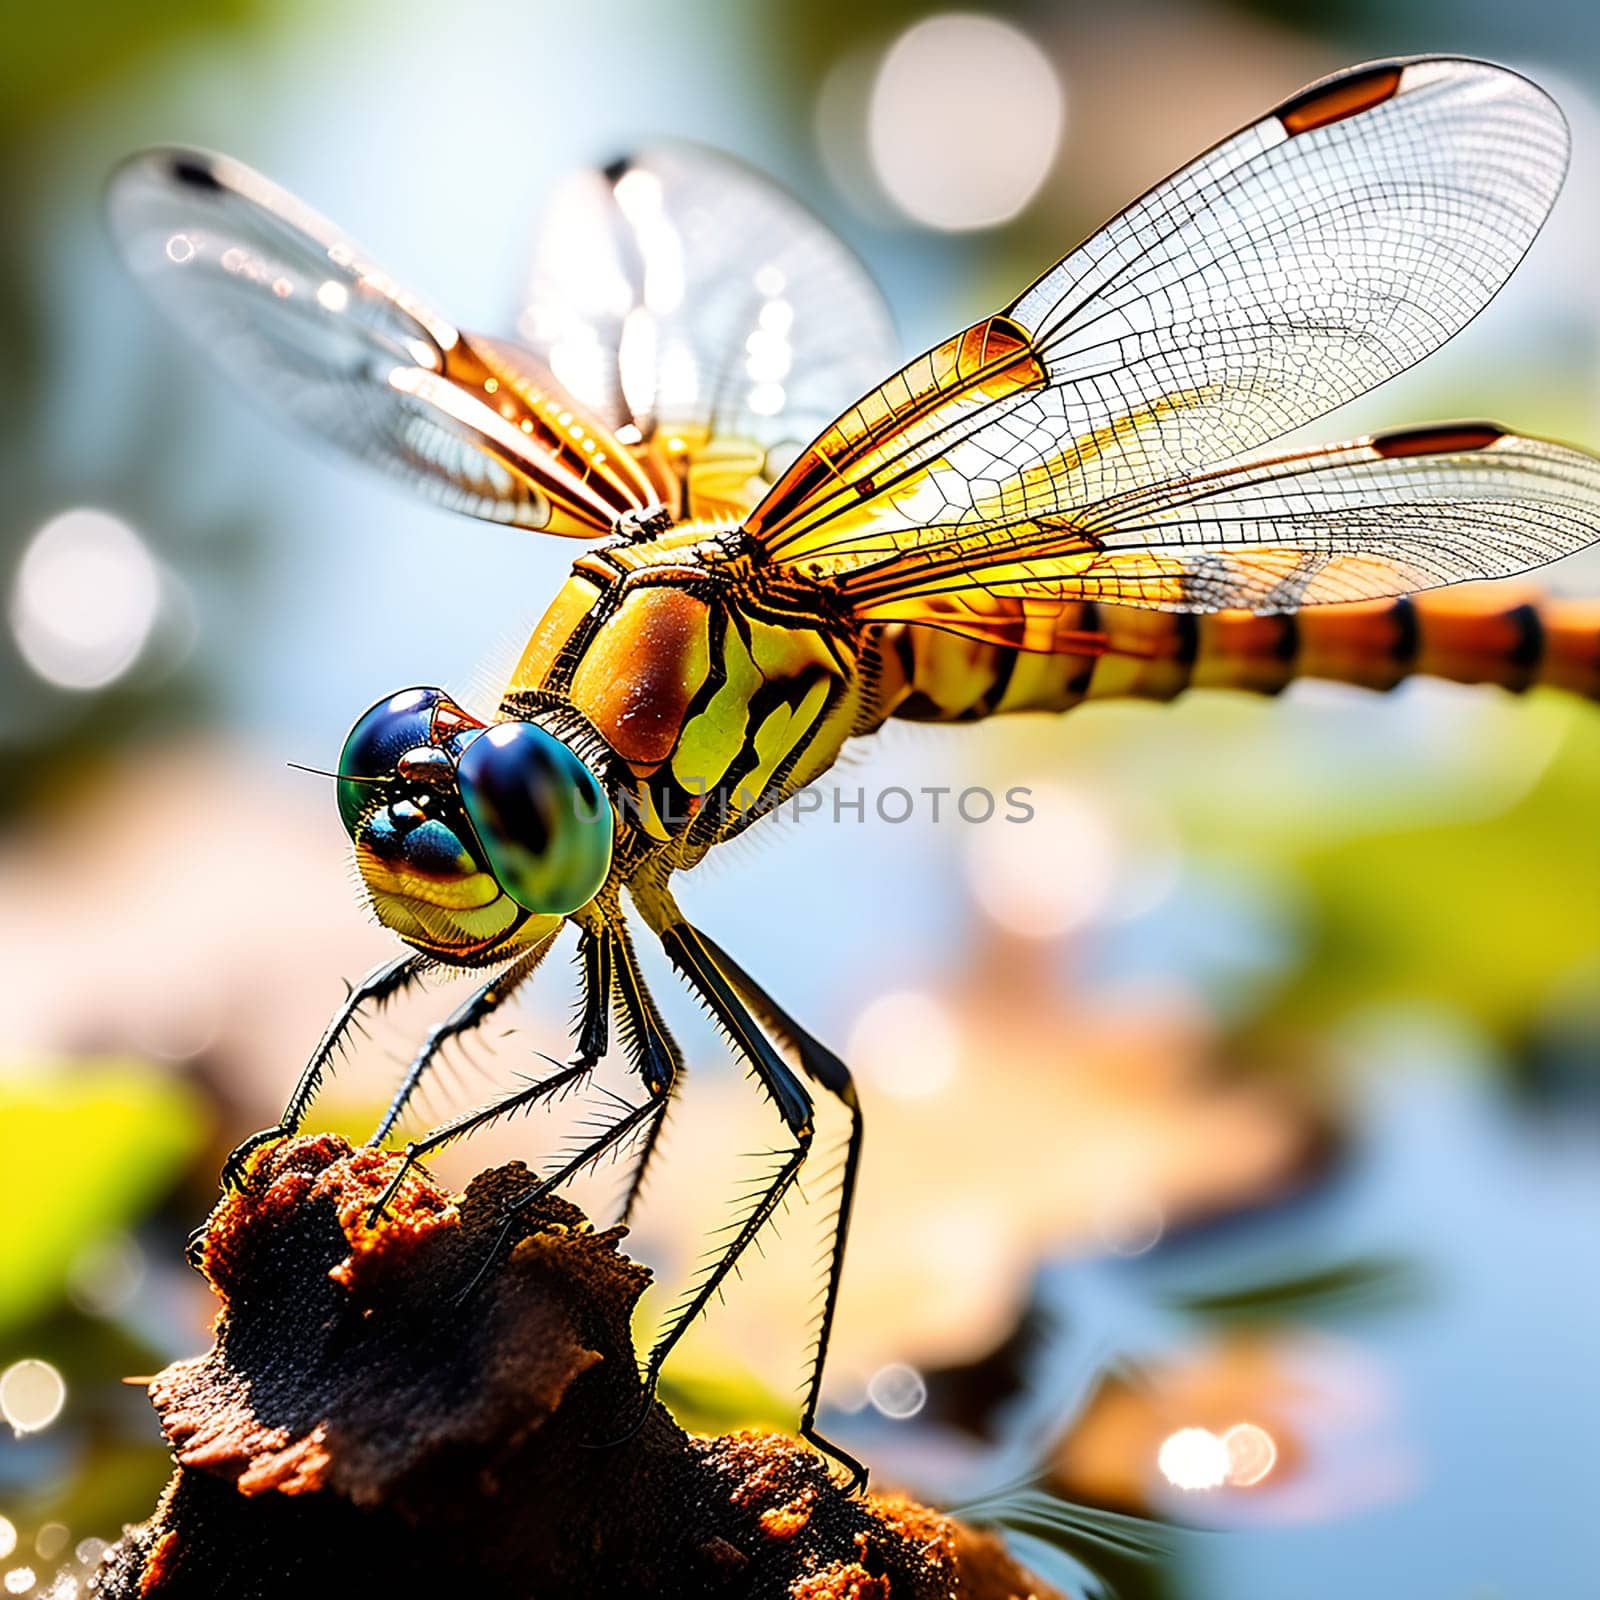 Macro Magic: Capturing the Stunning Beauty of a Dragonfly"